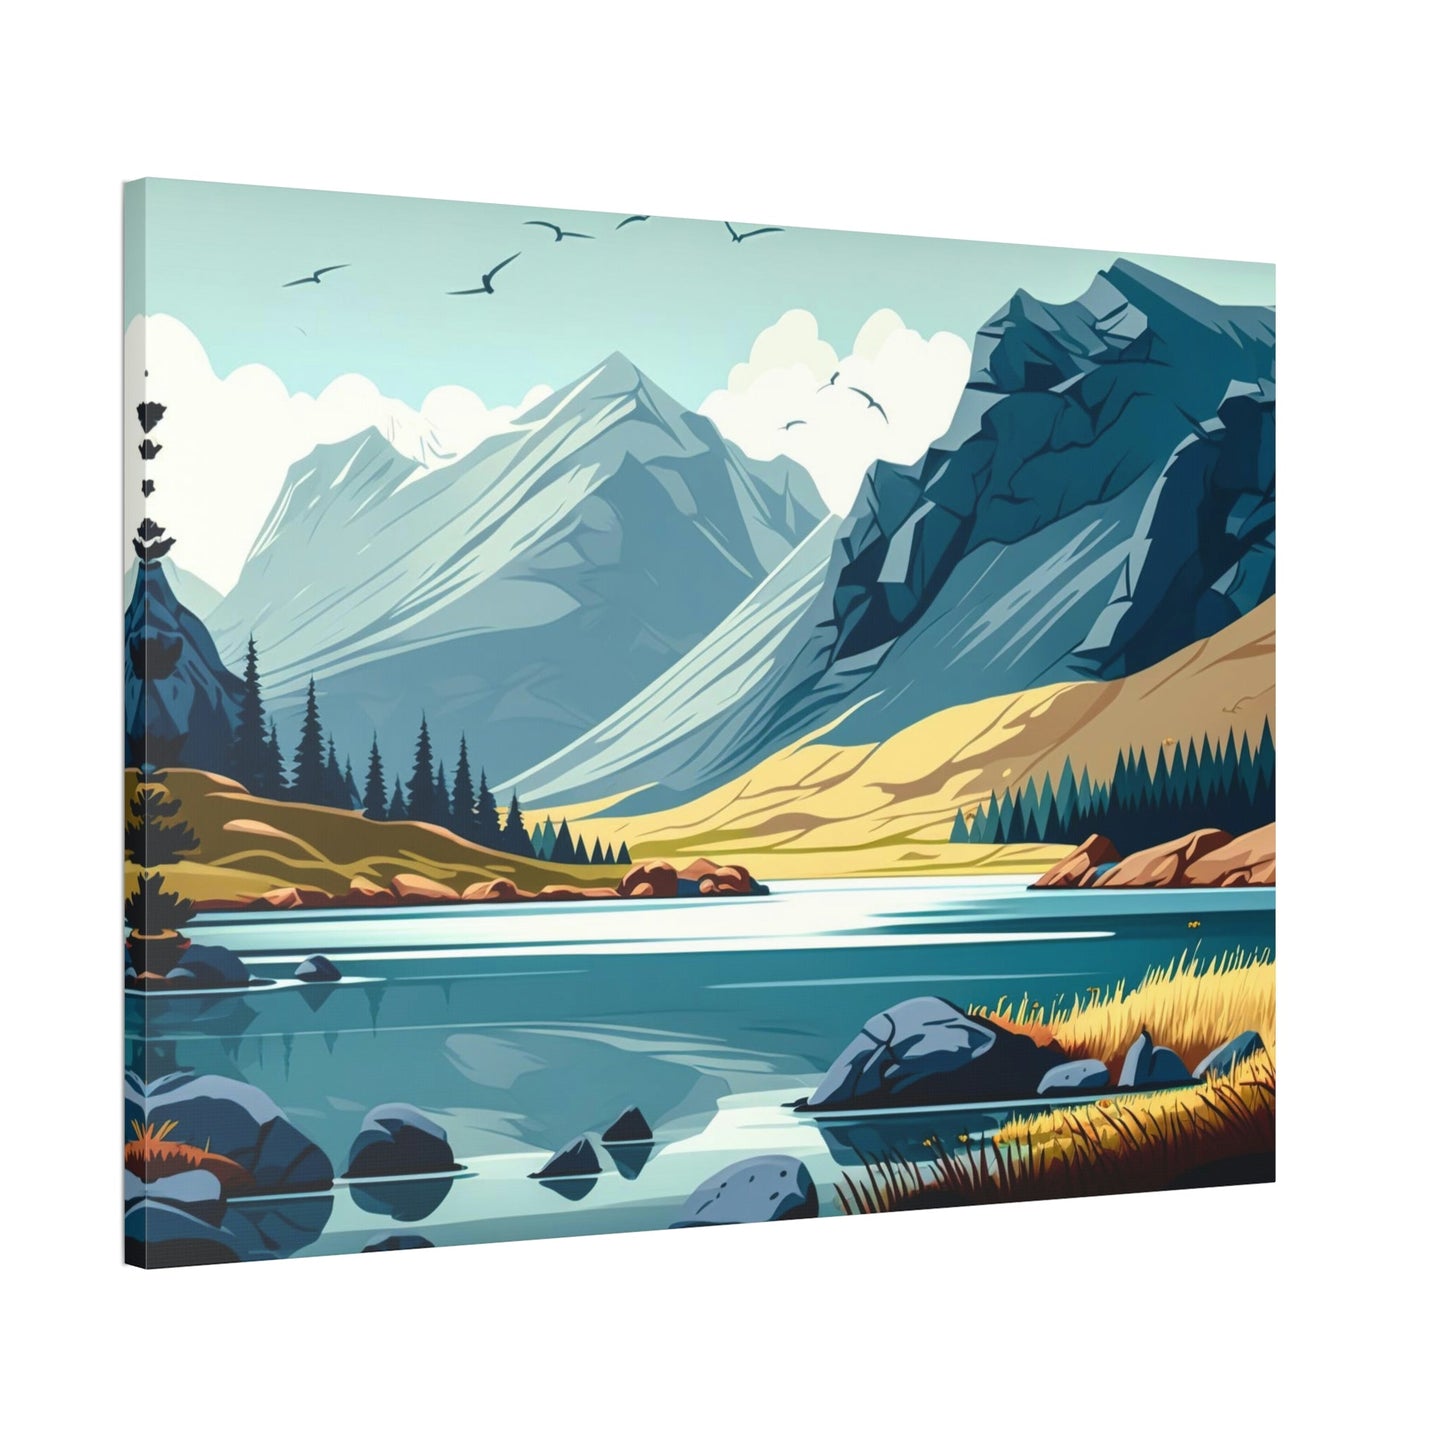 Lakeside Beauty: Wall Art of a Stunning Lake Landscape on Natural Canvas & Poster